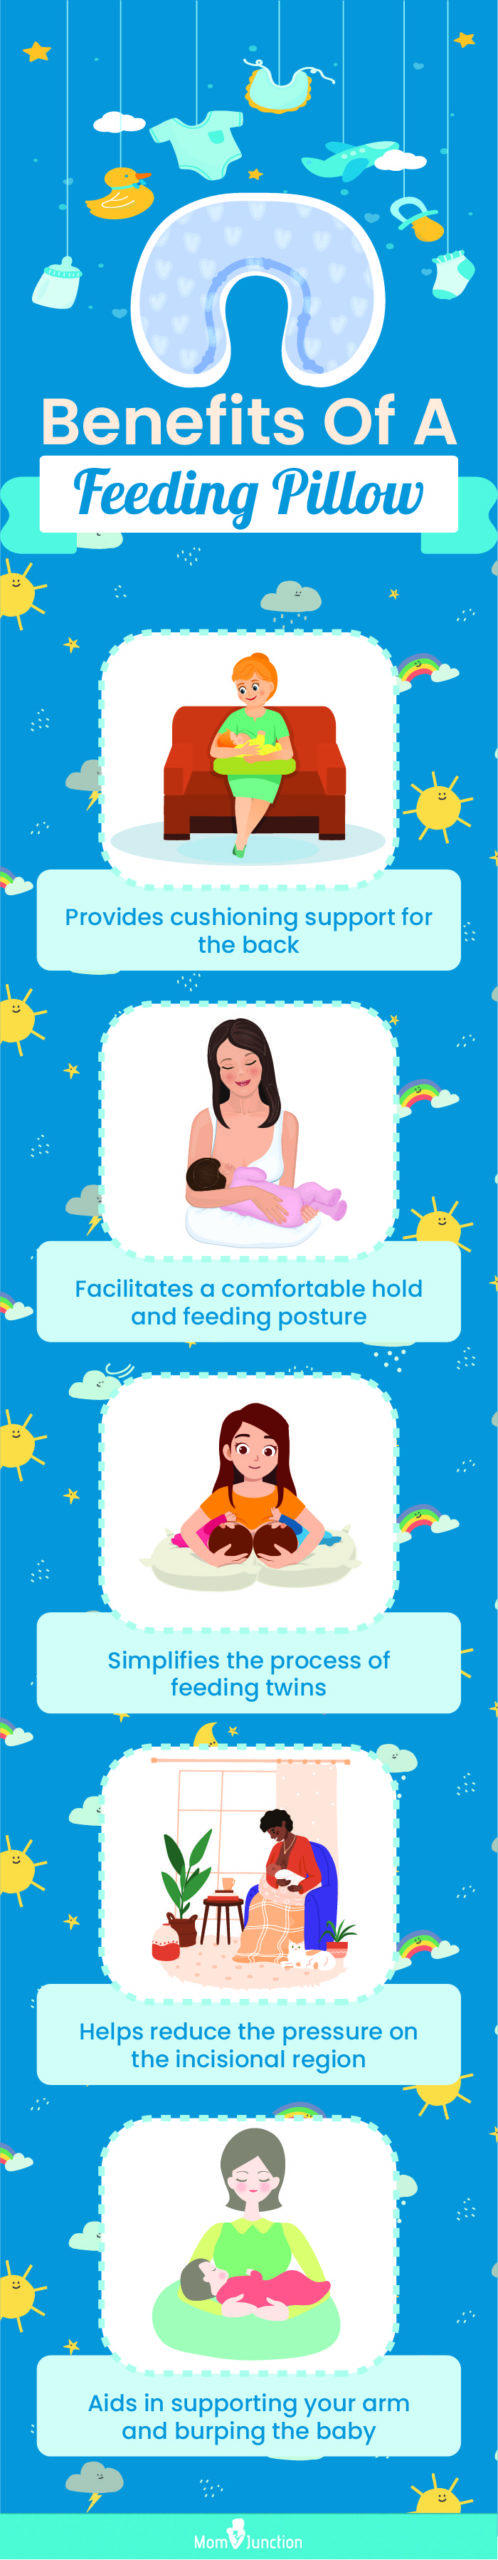 advantages of a feeding pillow [infographic]